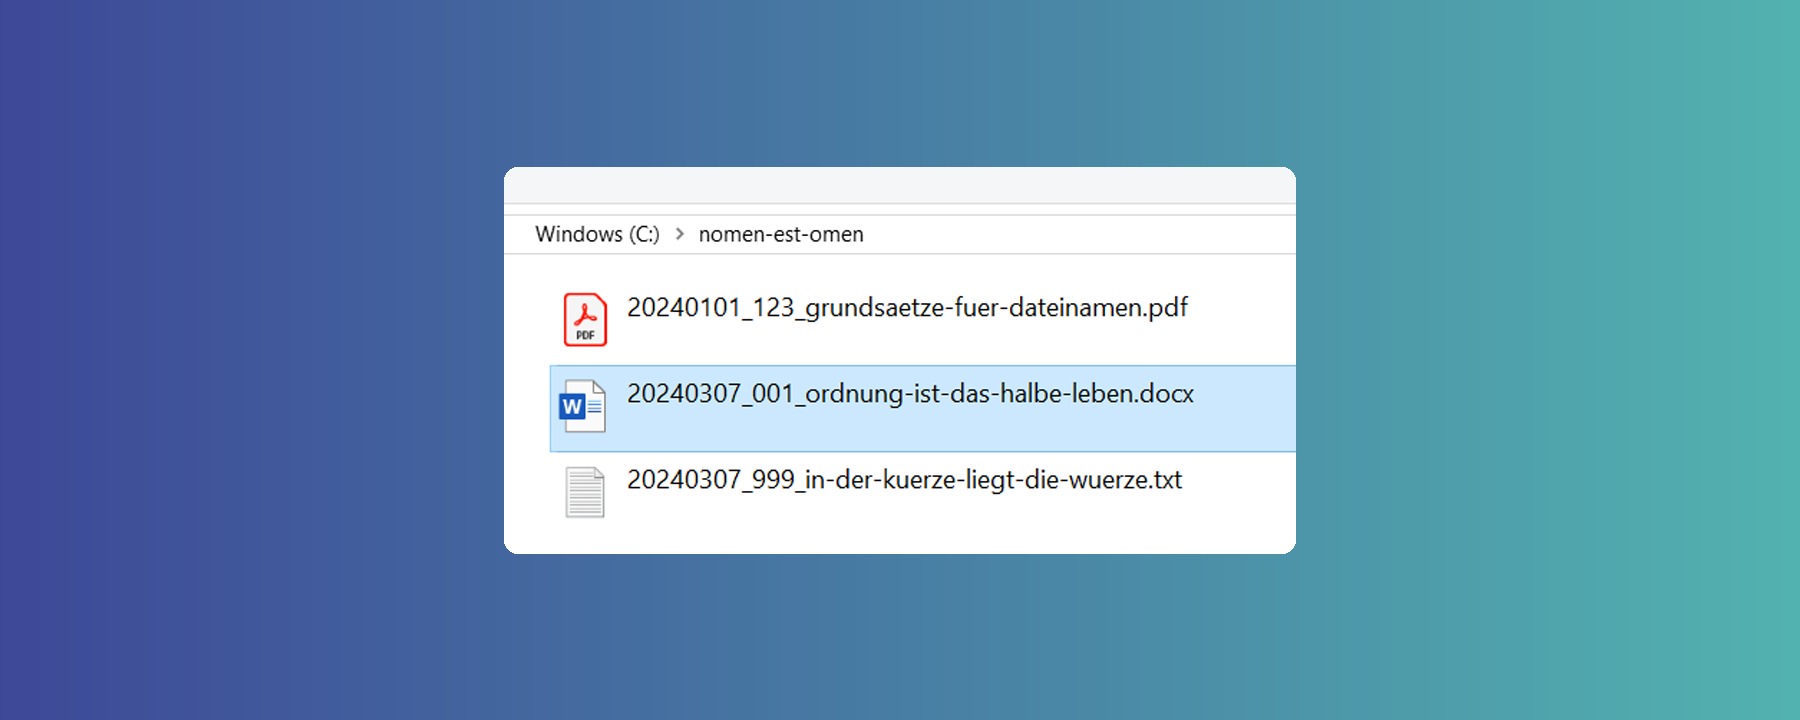 Header image with screenshot from Windows Explorer on the subject of file naming